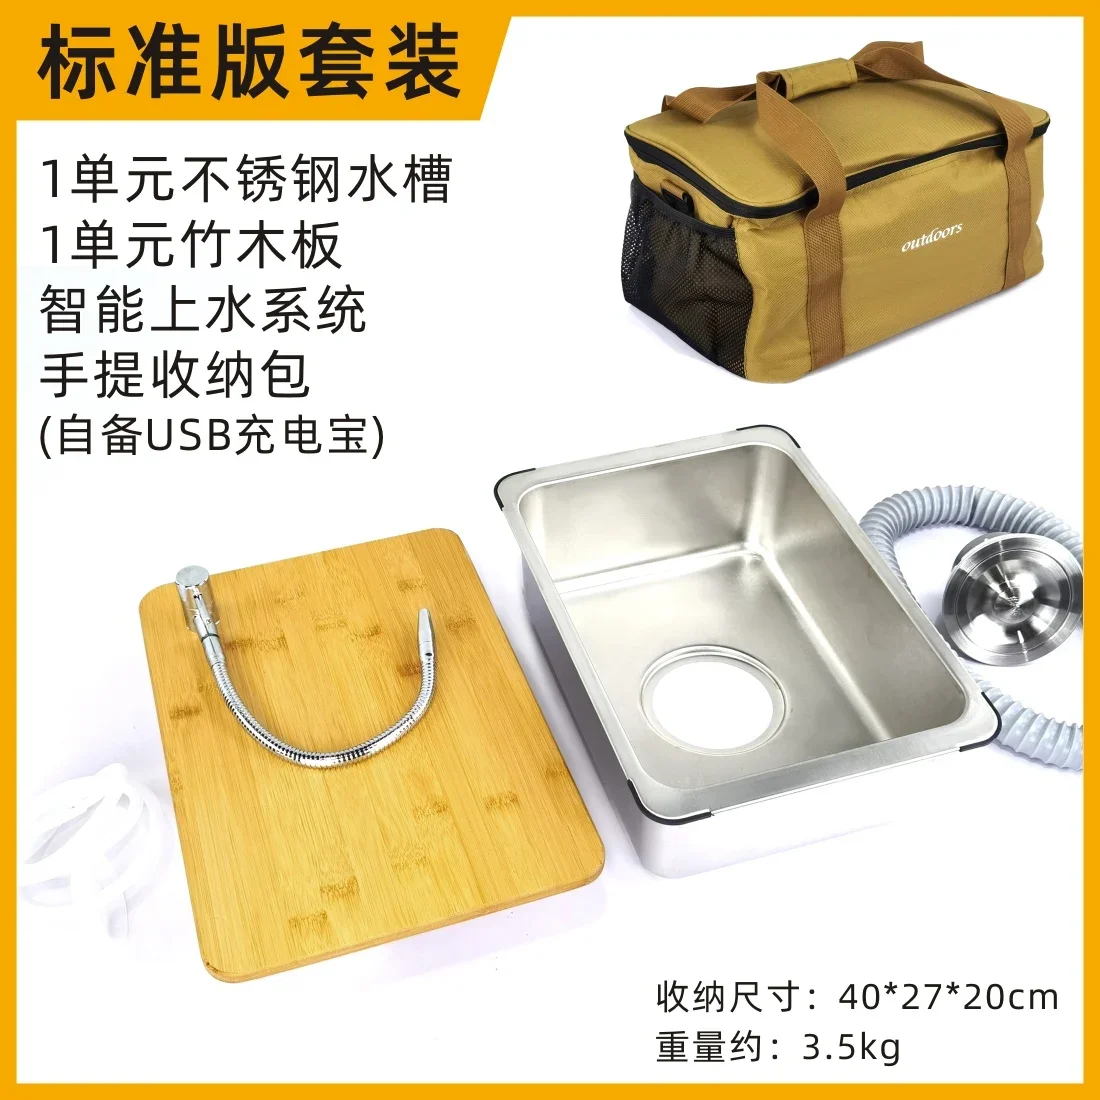 Outdoor IGT Camping Table Kitchen Zebra One Unit Sink Module Combination of Faucet Washing Basin Pool Snow Peak